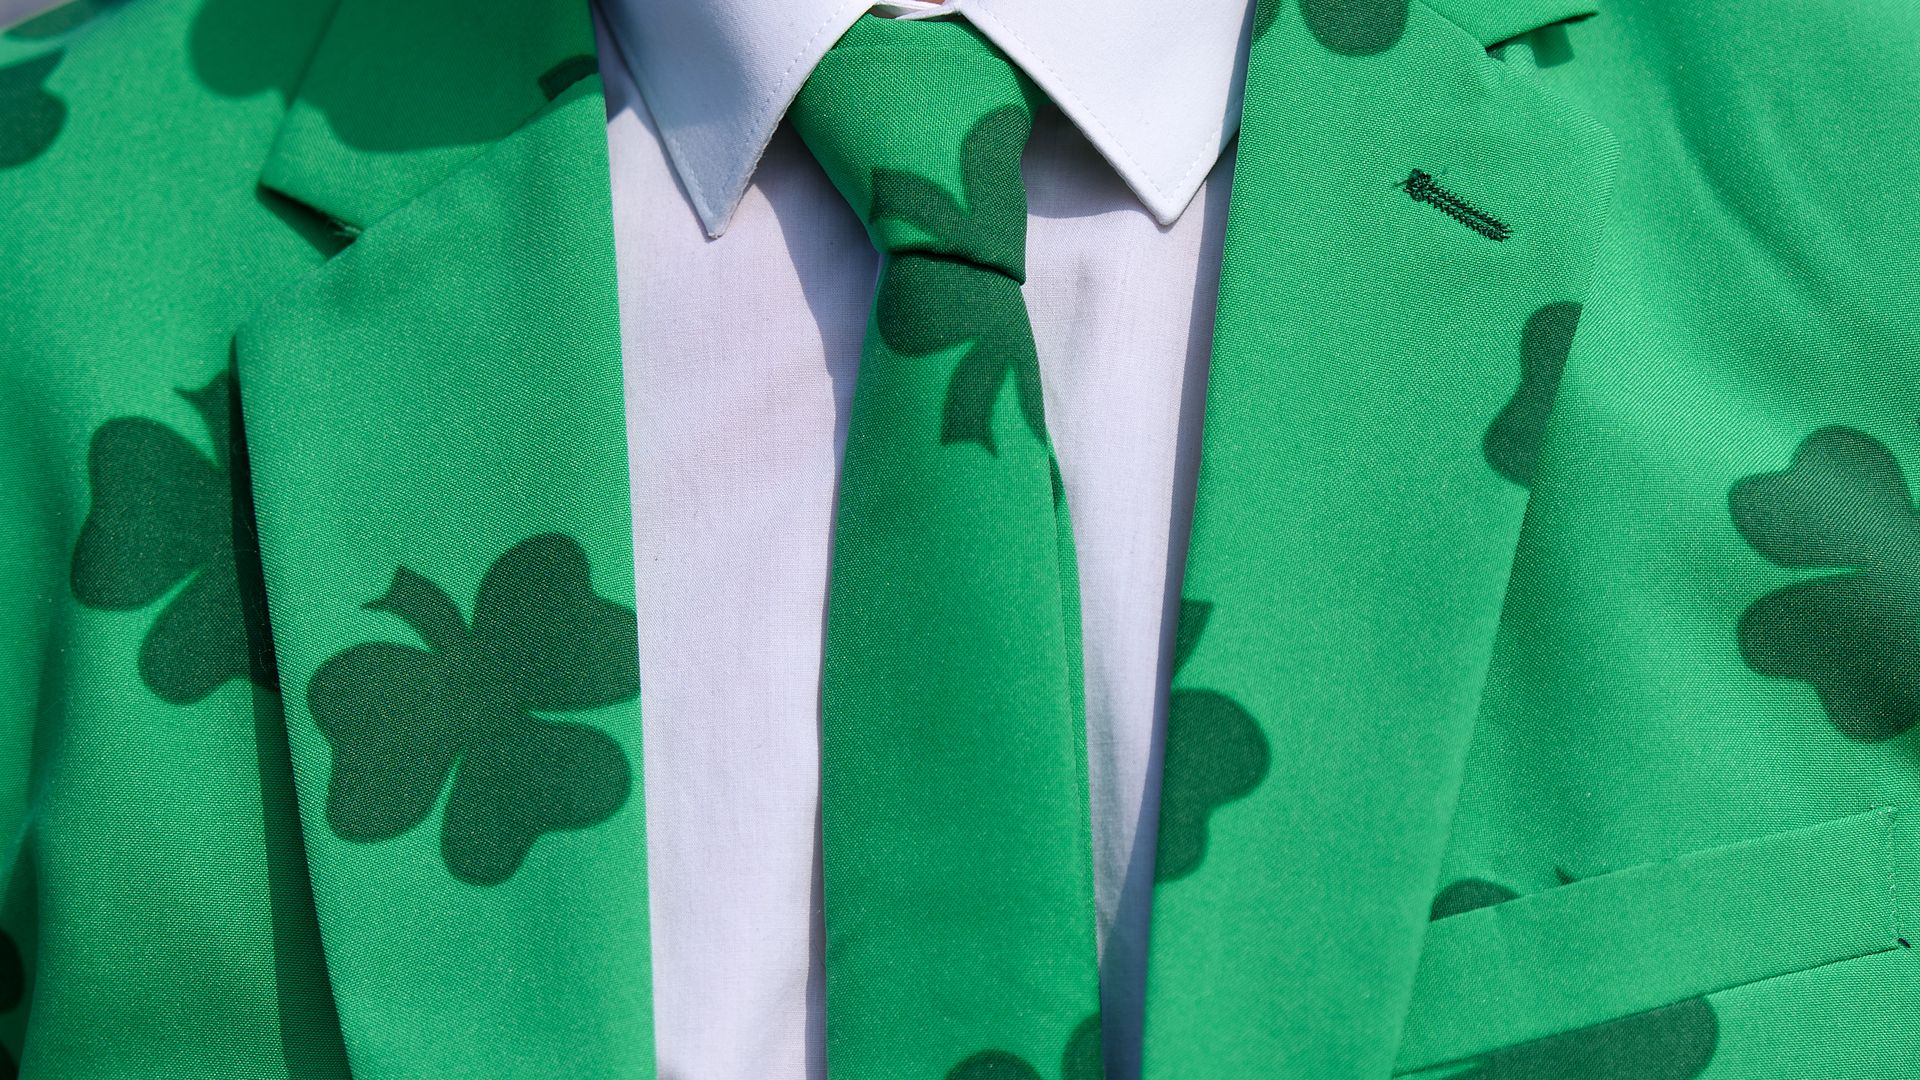 A shamrock-printed green suit and tie